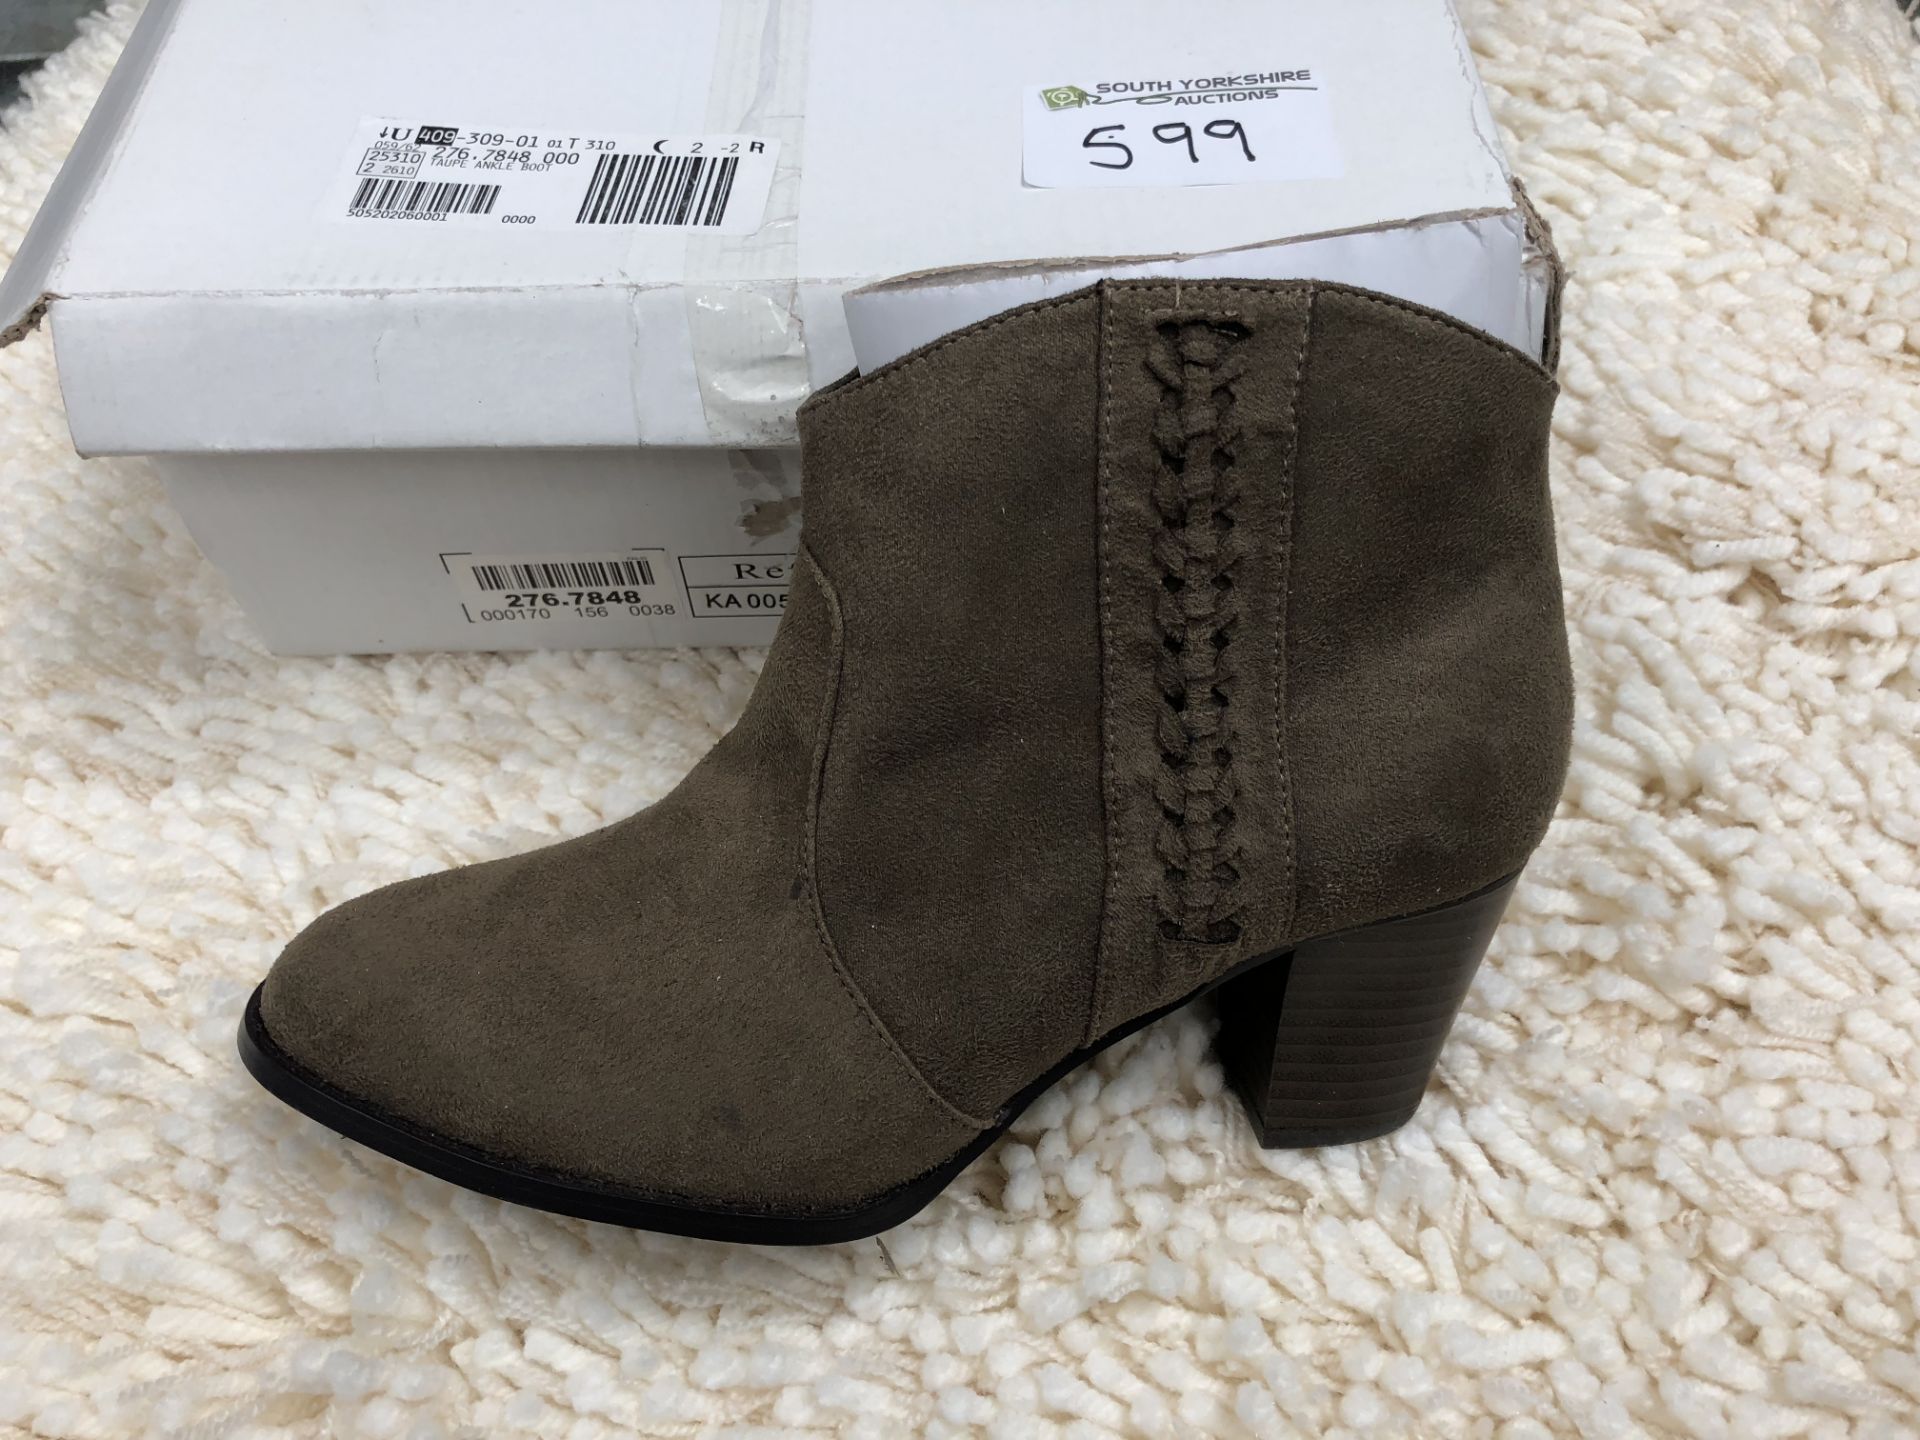 Unknown, Size 5, Brown Suede Heel Short Boots, New and Boxed